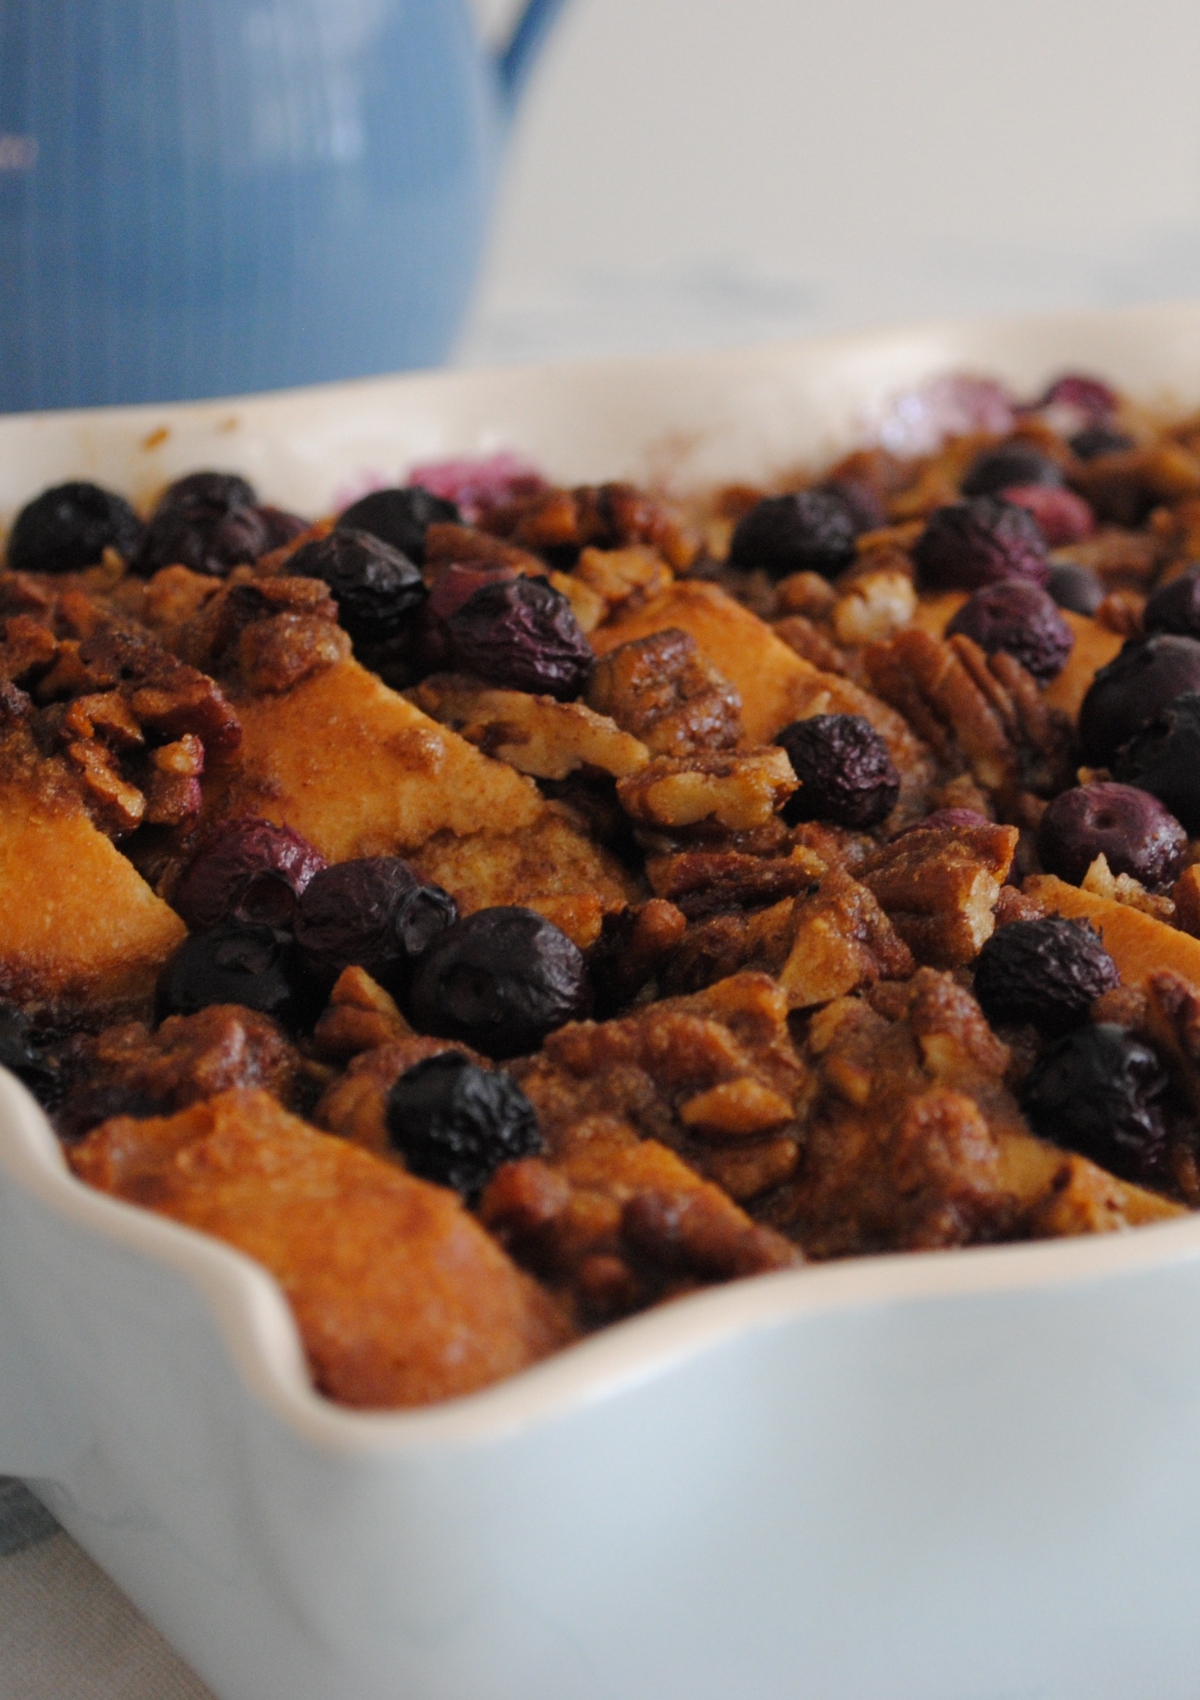 Blueberry Bread Pudding or French Toast Casserole